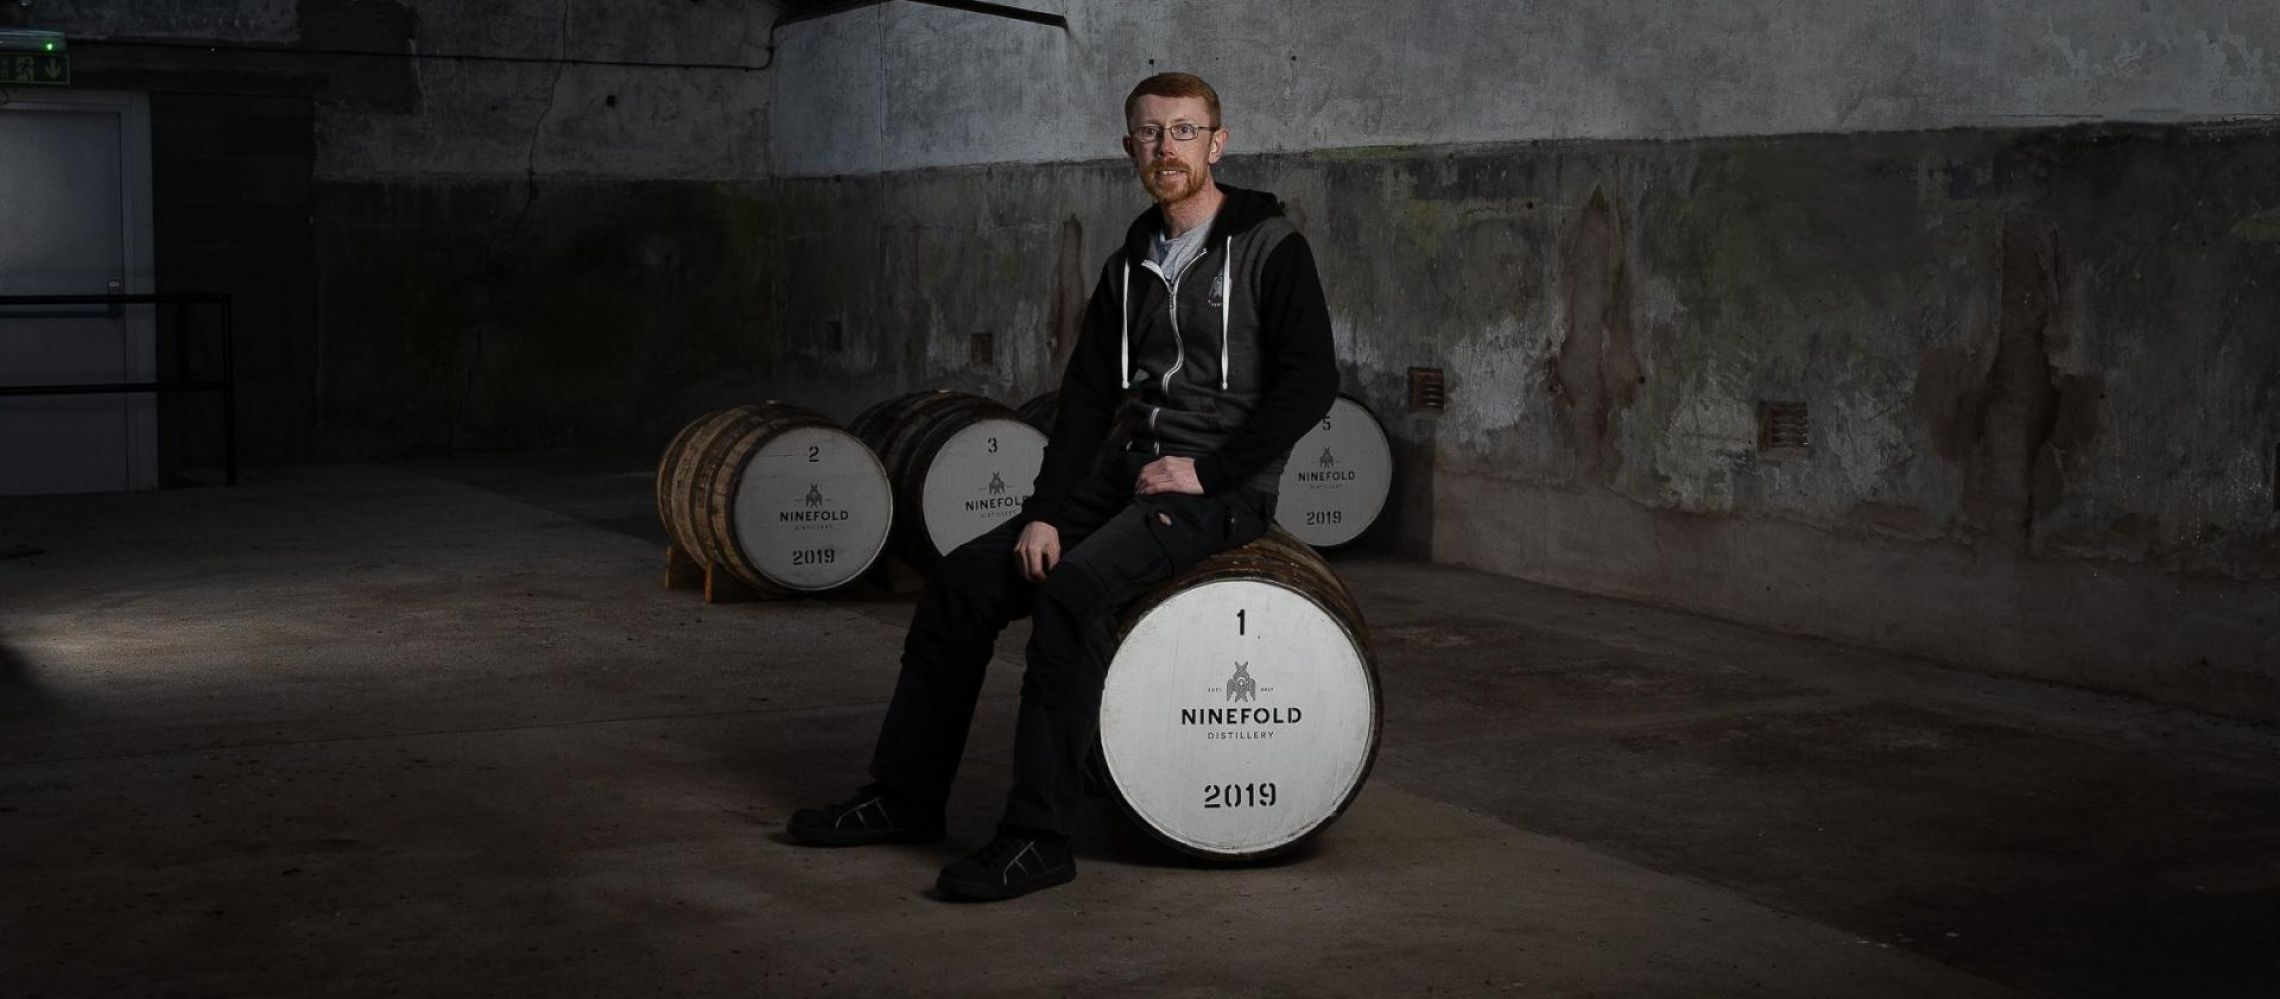 Photo for: Know Your Distillers: Dr. Kit Carruthers